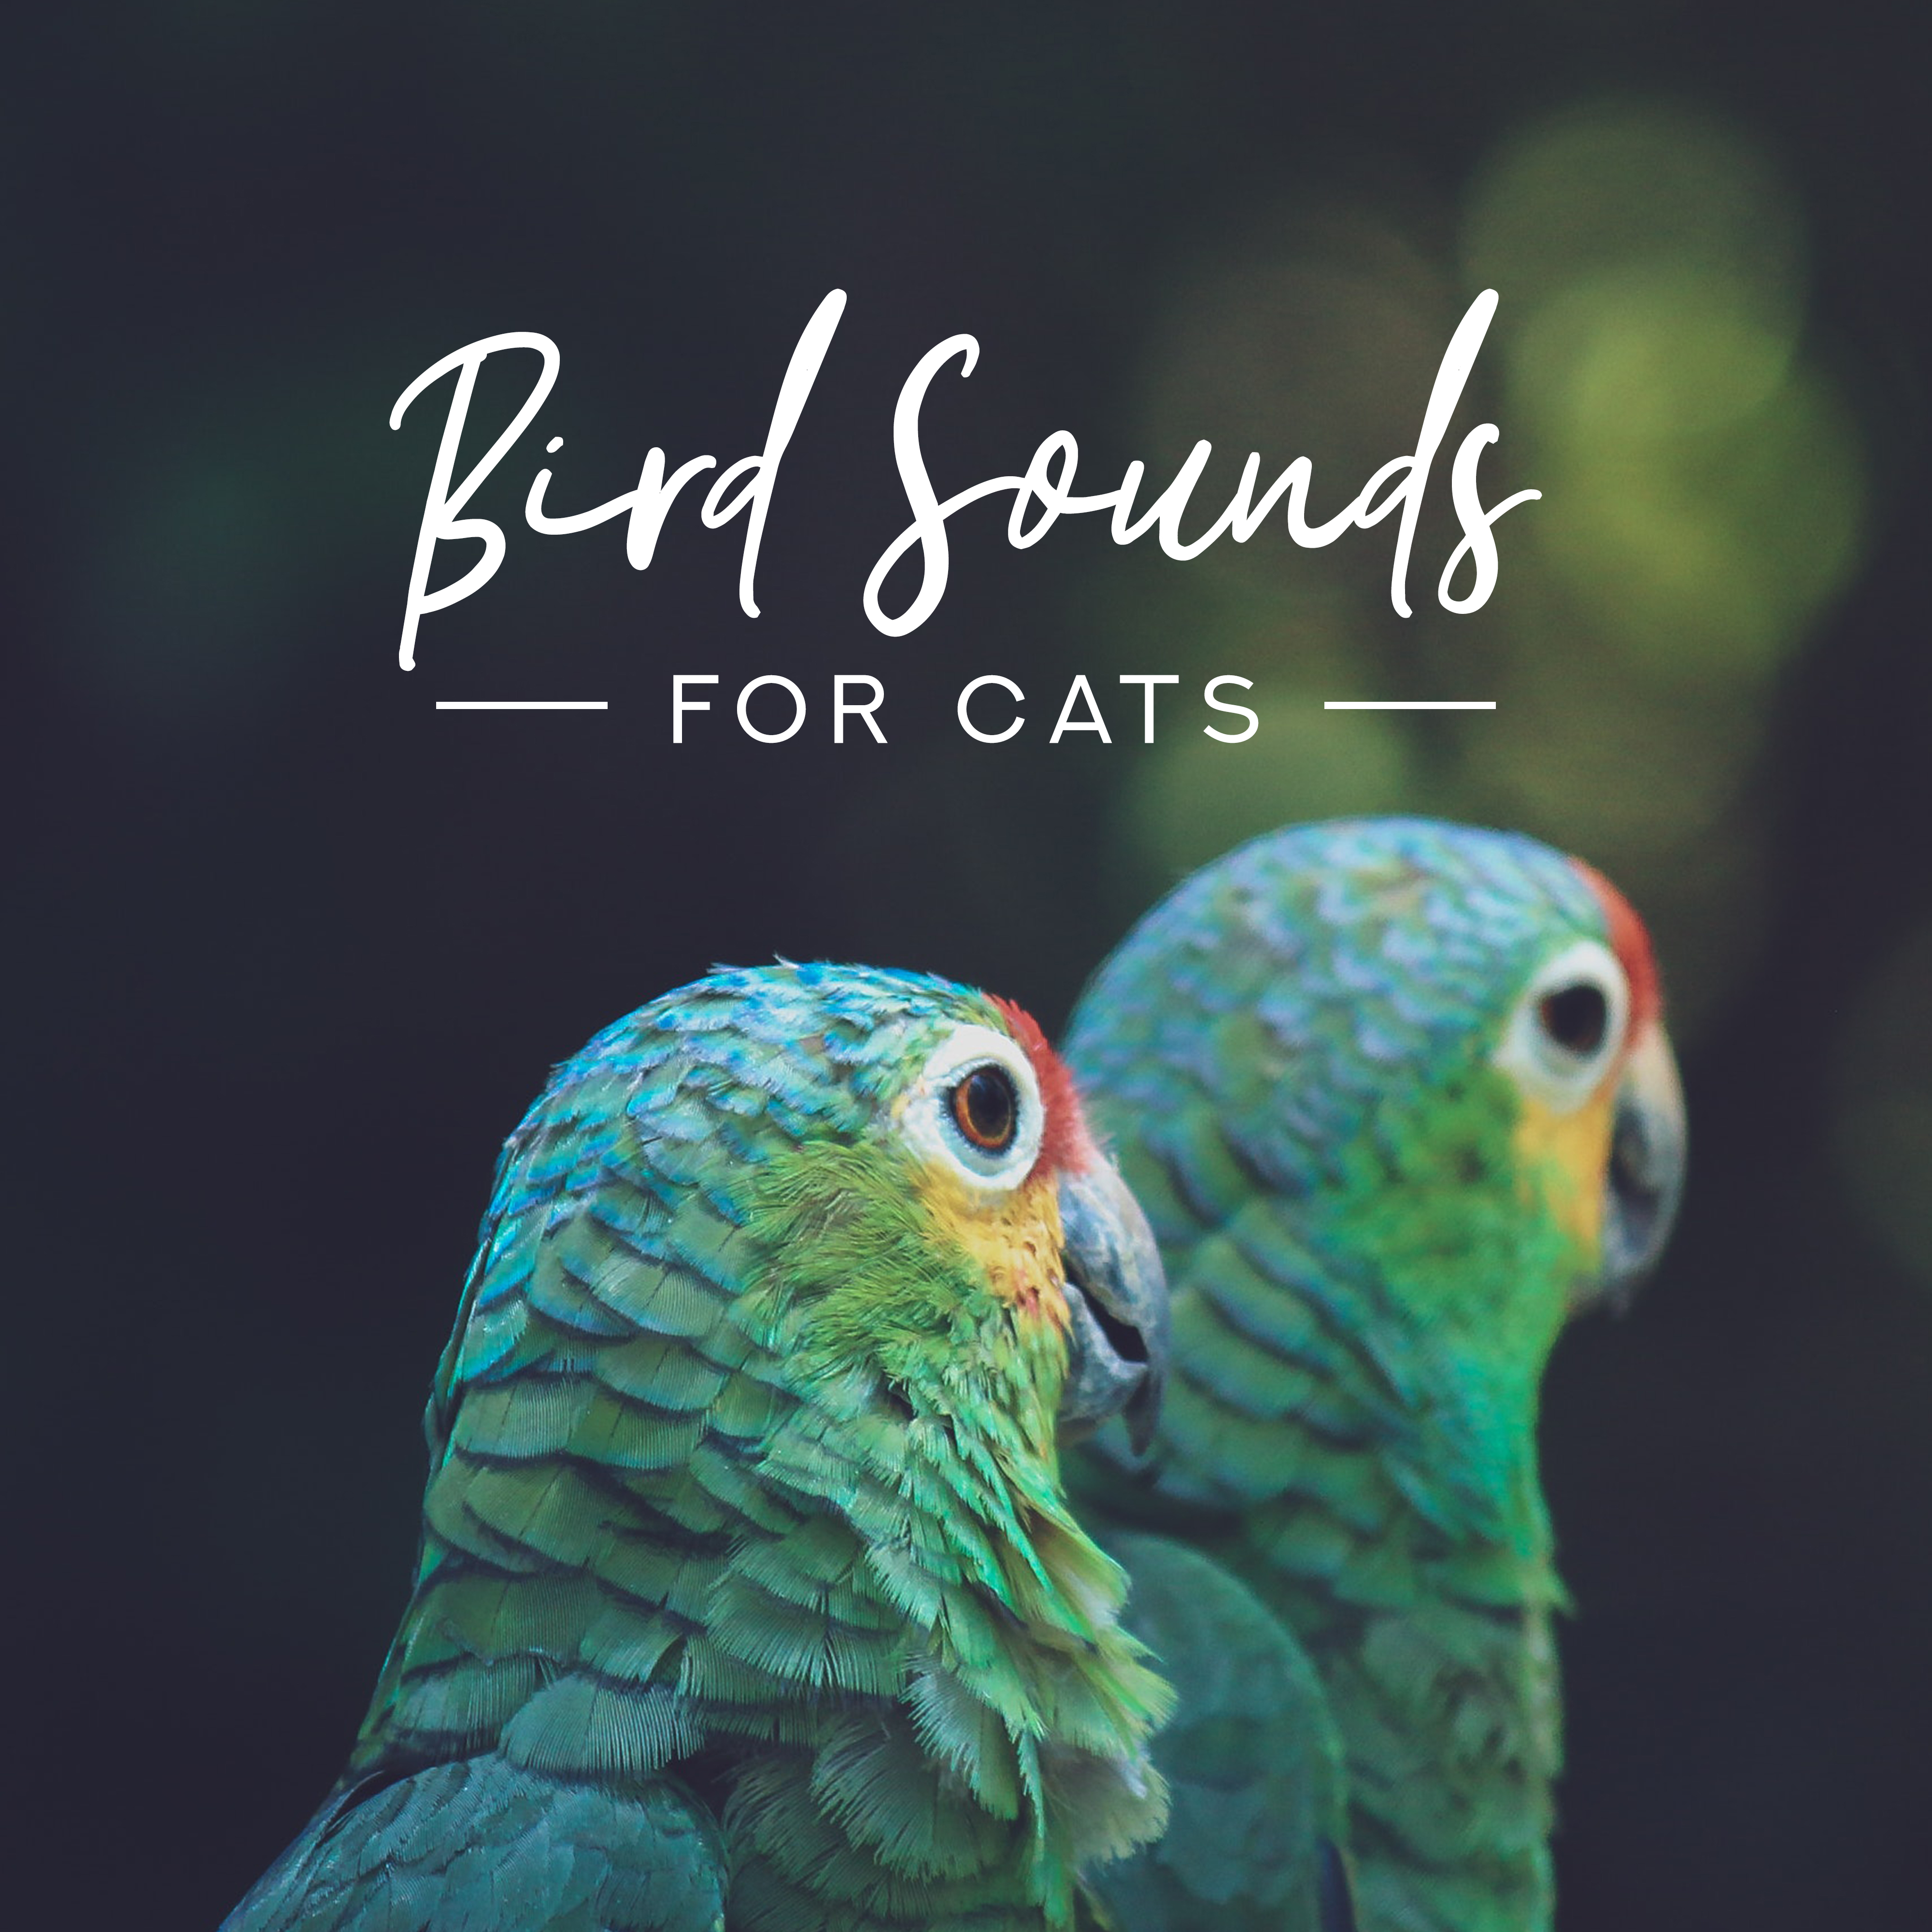 Bird Sounds for Cats: Sounds of Birds for Cat Relaxation, Anti Stress Music, Nature Sounds